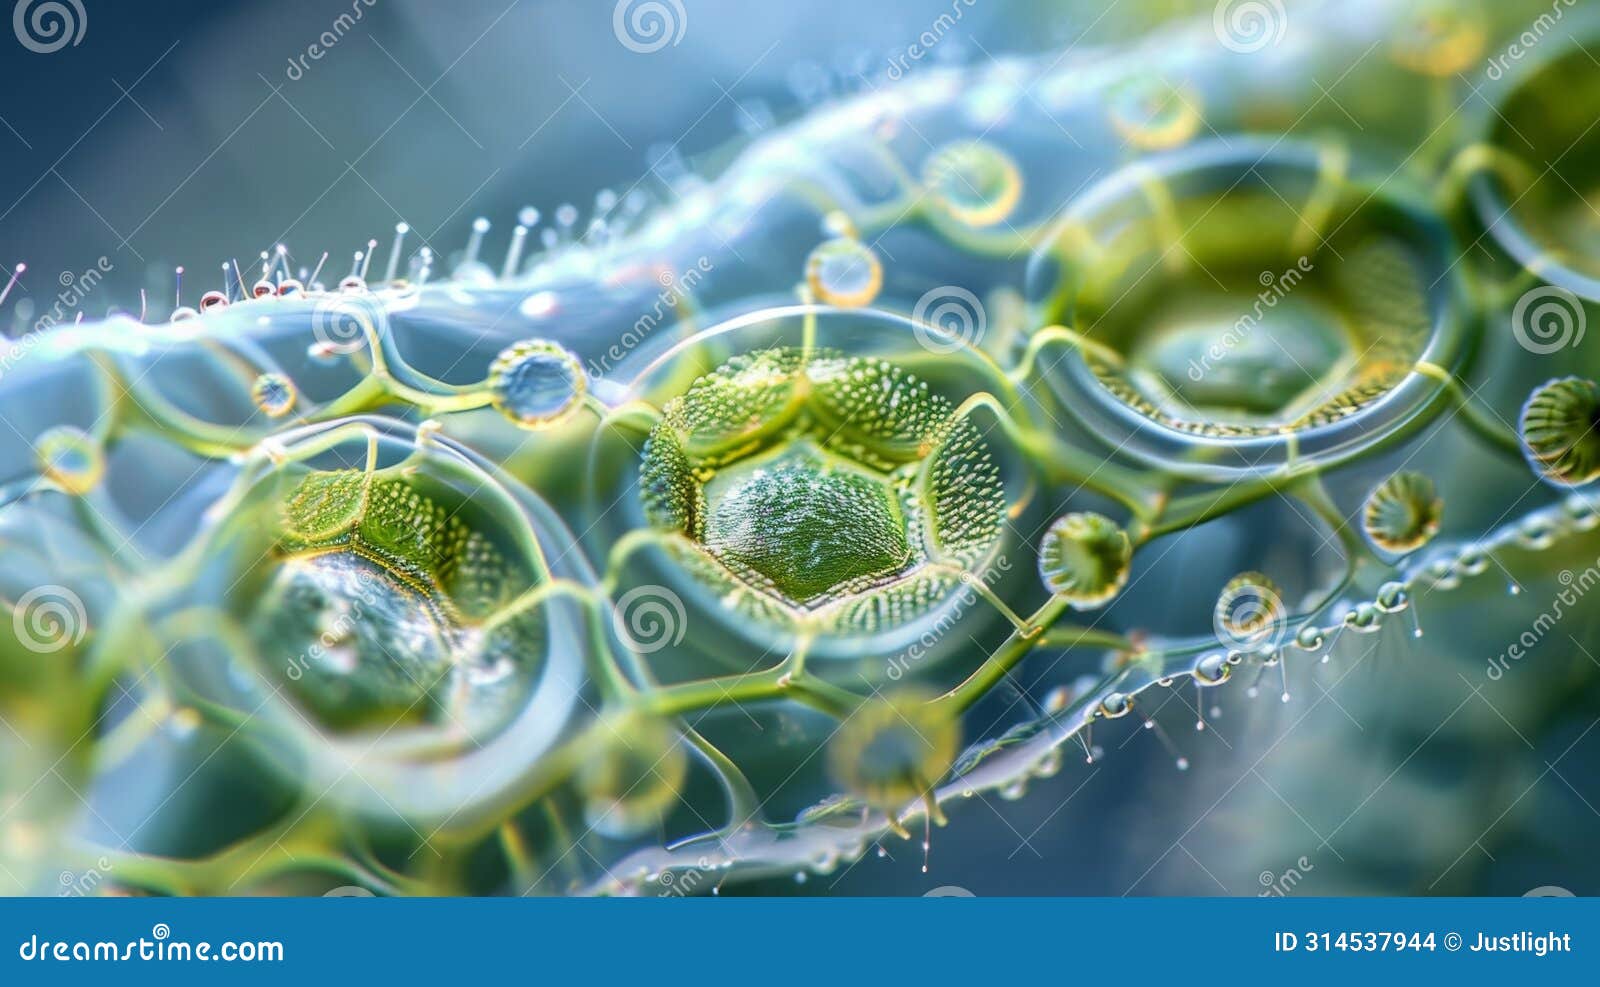 the intricate contractile vacuole system of a ciliate protozoa responsible for regulating its internal water balance. .